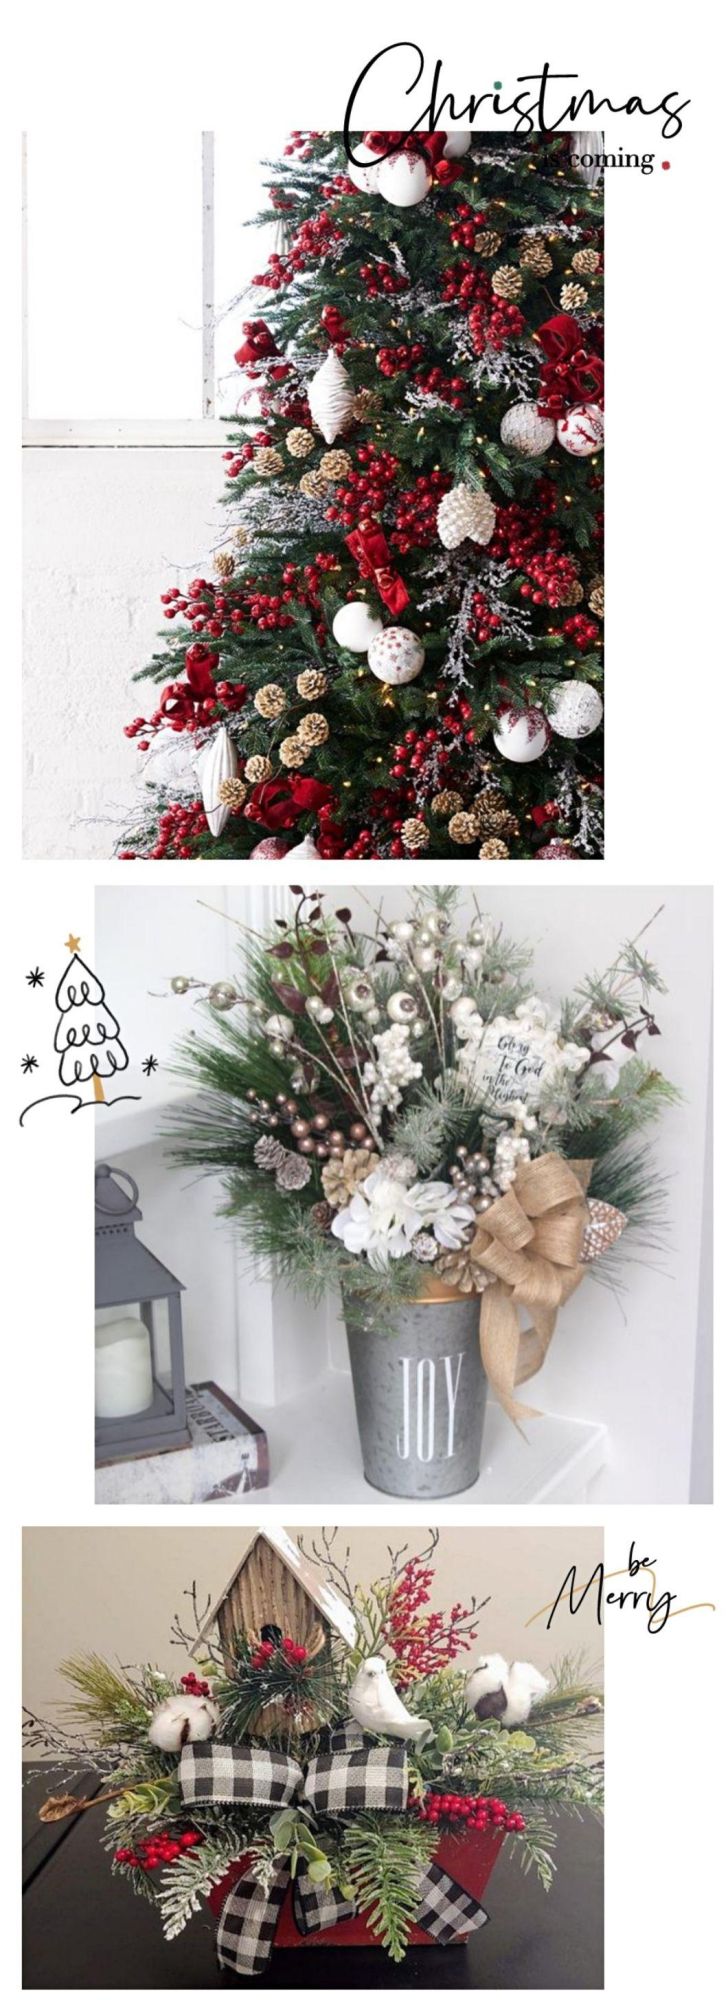 Christmas Decoration Flower Arrangement White Edge Leaves Red Fruit String Cuttings Home Decoration